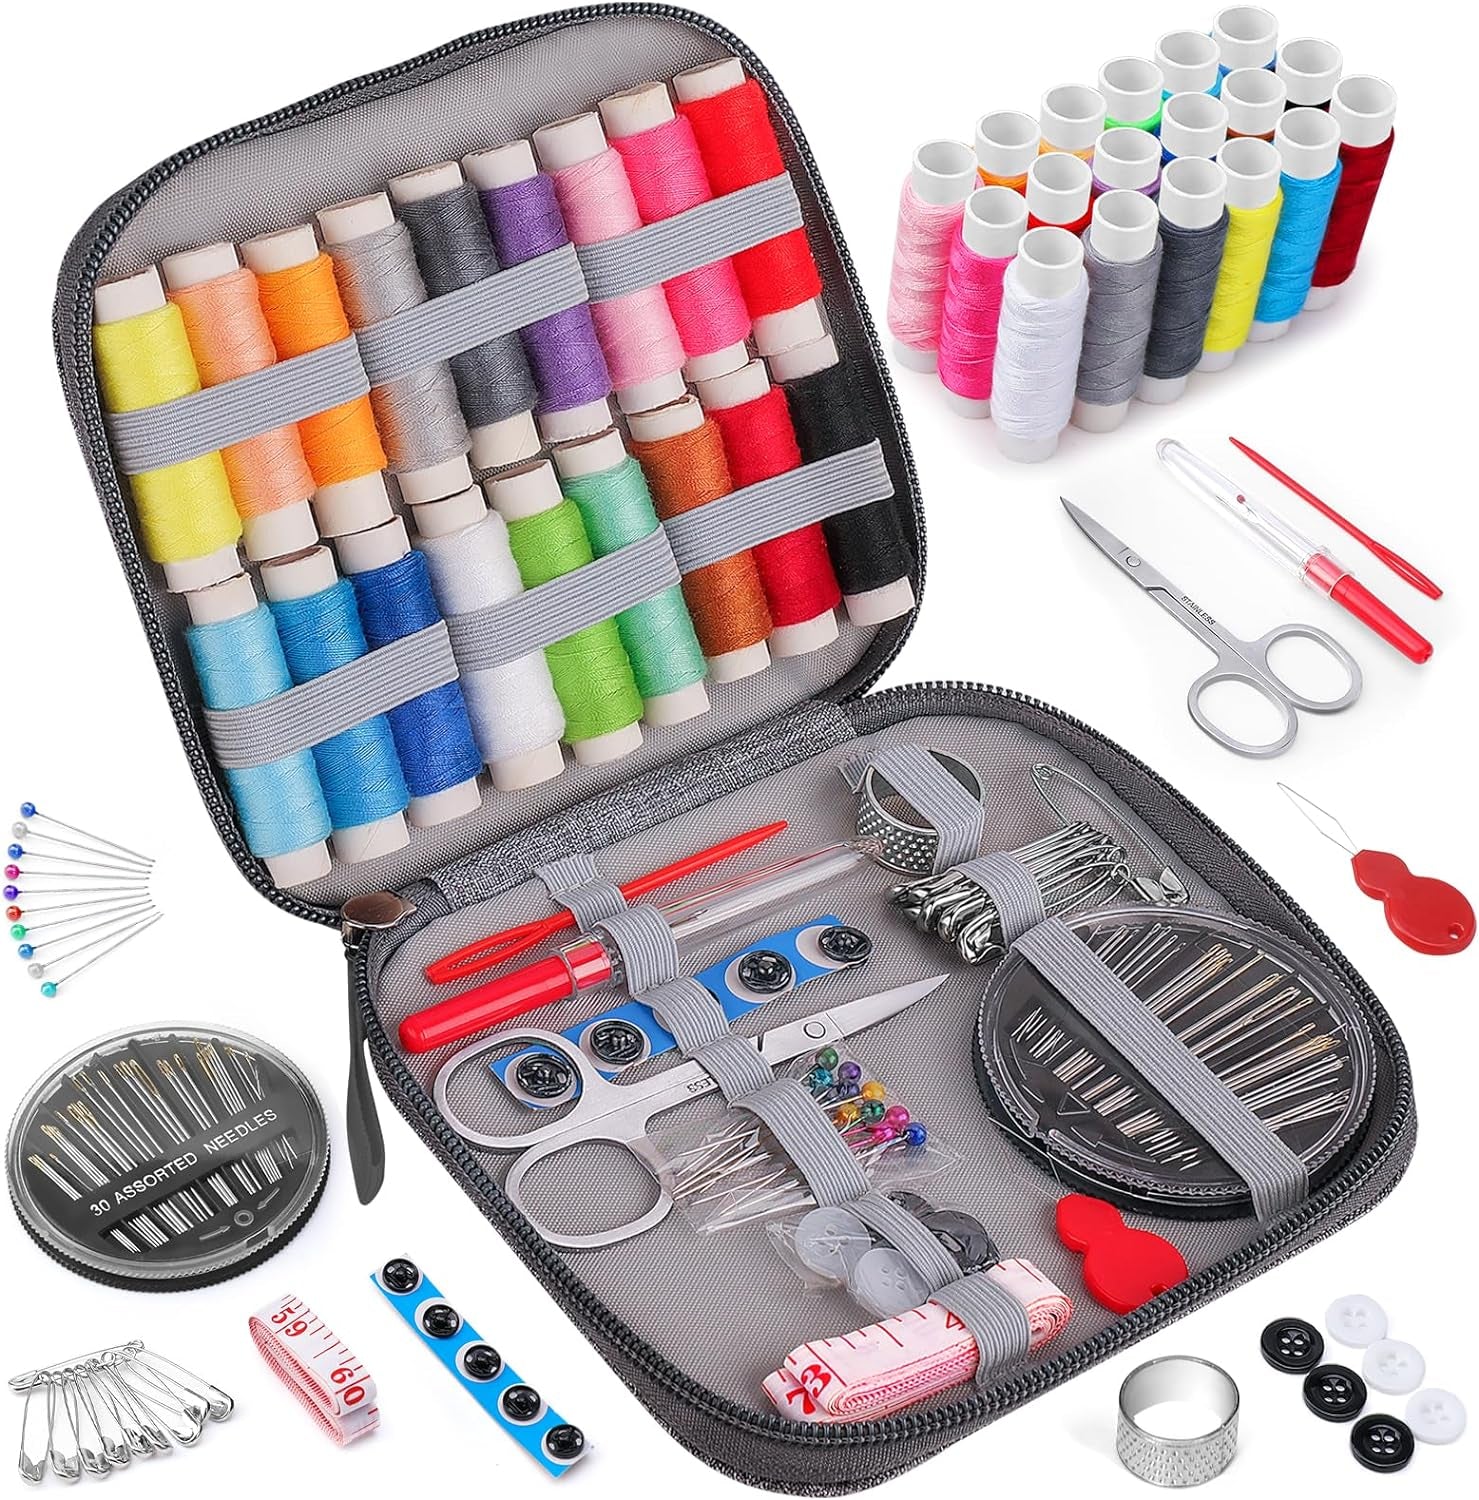 Sewing Kit Gifts for Grandma, Mom, Friend, Adults Beginner Kids Traveler, Portable Sewing Supplies Accessories with Case Contains Thread, Needle, Scissors, Measure Tape, Thimble Etc(Black, M)